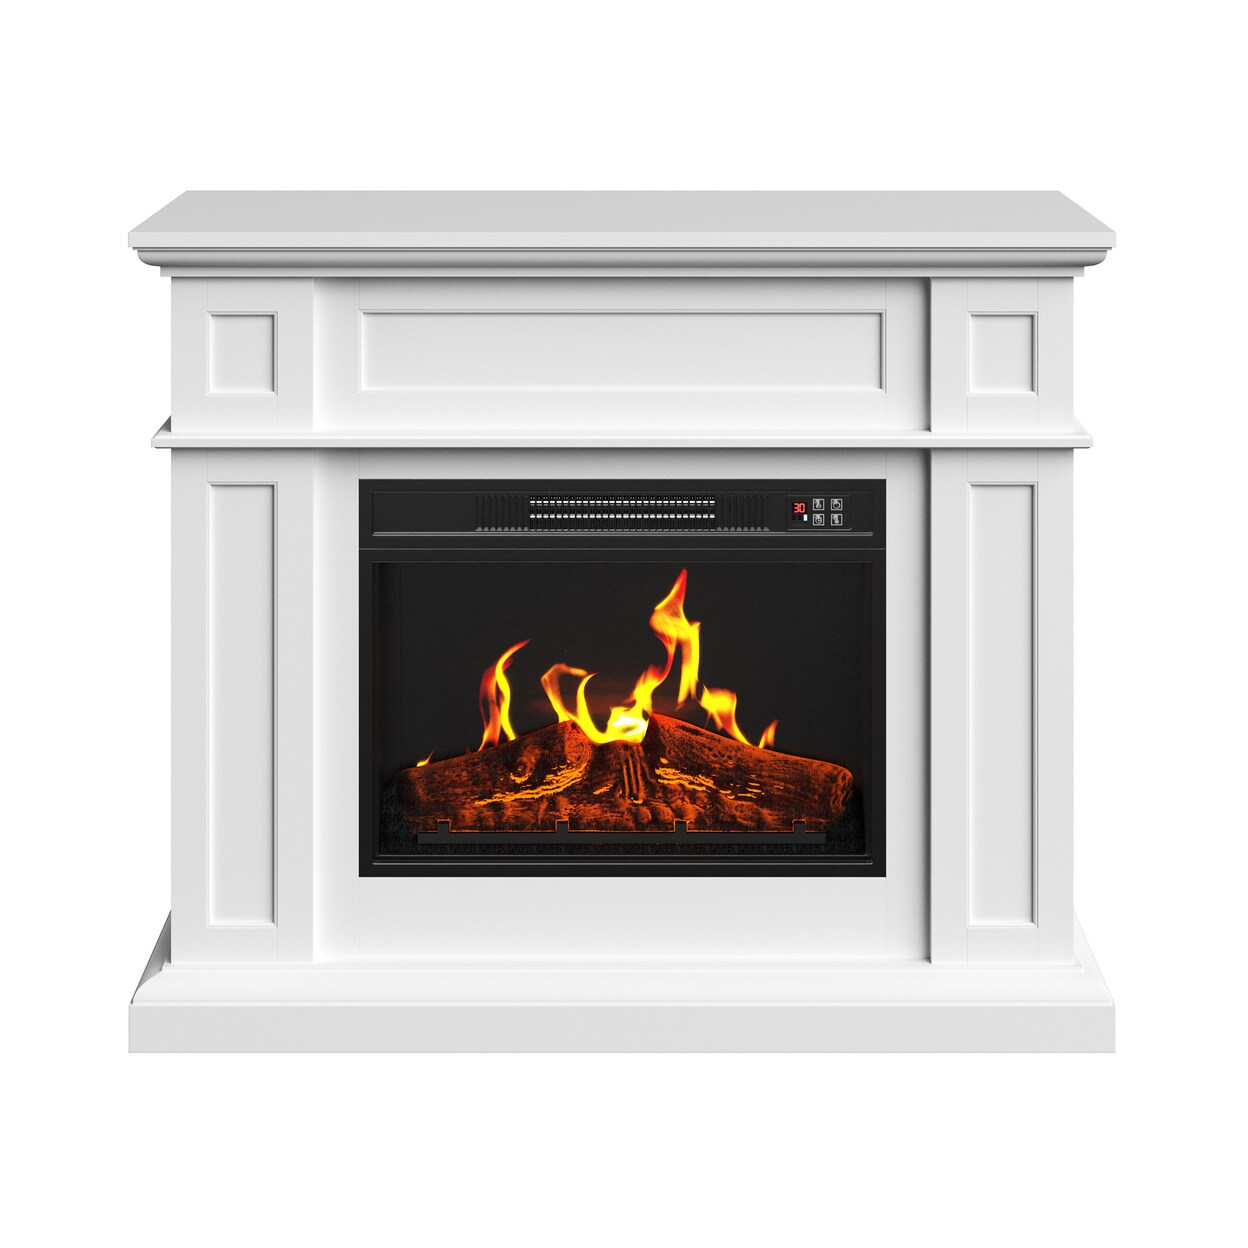 Northwest Electric Fireplace with Mantel Freestanding Heater Living Room Decor